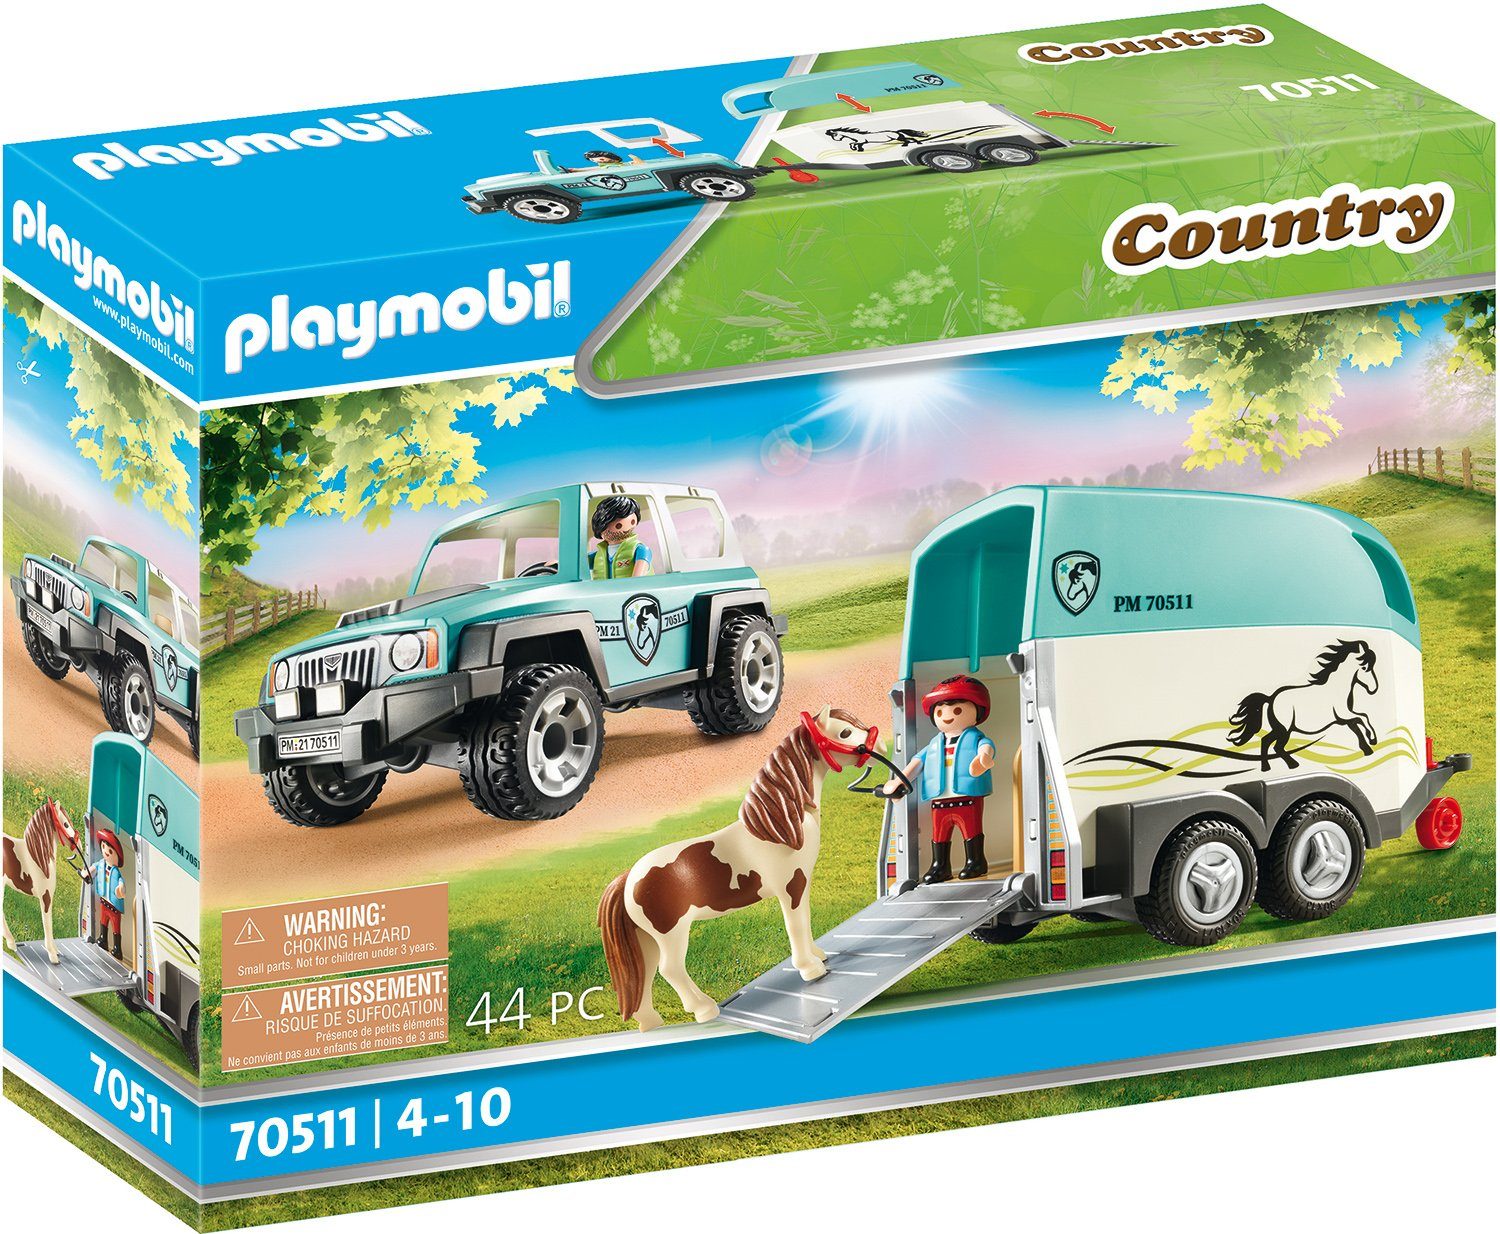 Konstruktions-Spielset PKW Country, St), Germany Ponyanhänger in (44 (70511), mit Playmobil® Made